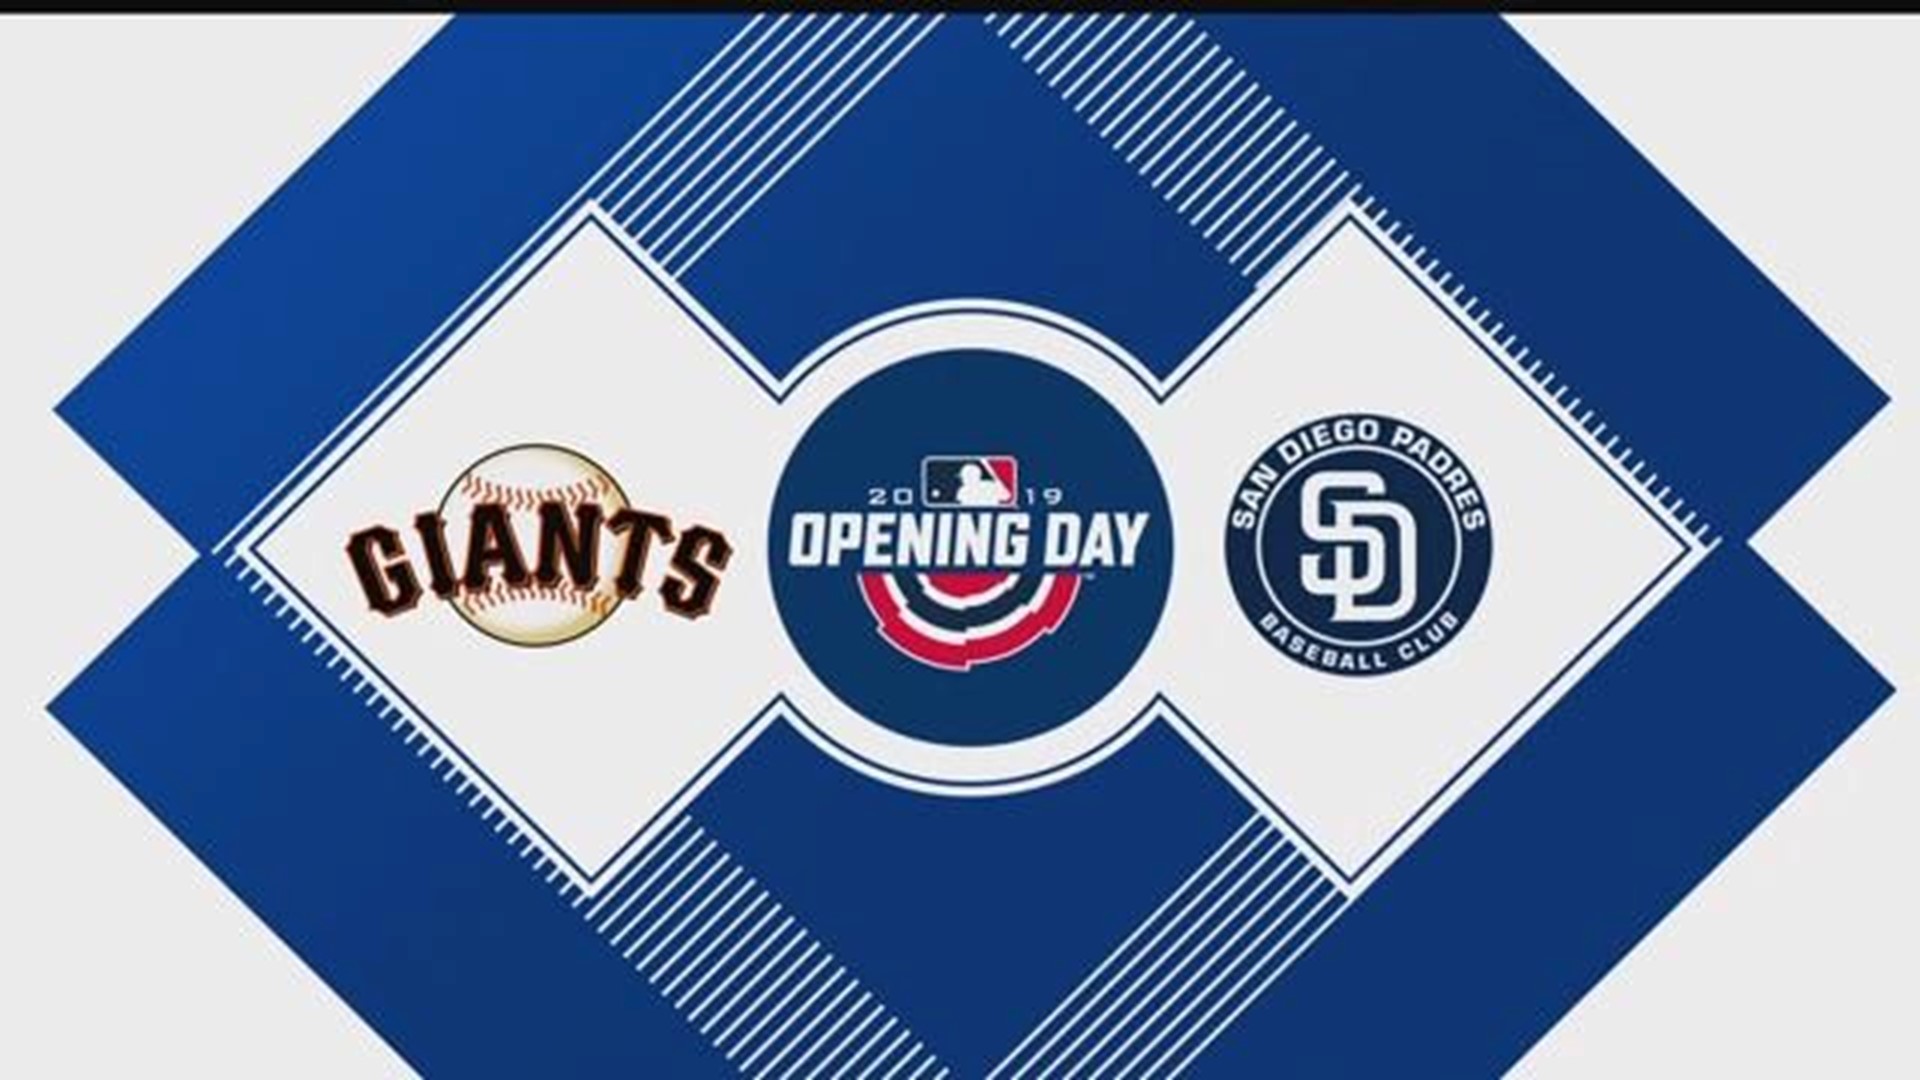 San Diego Padres Opening Day block party